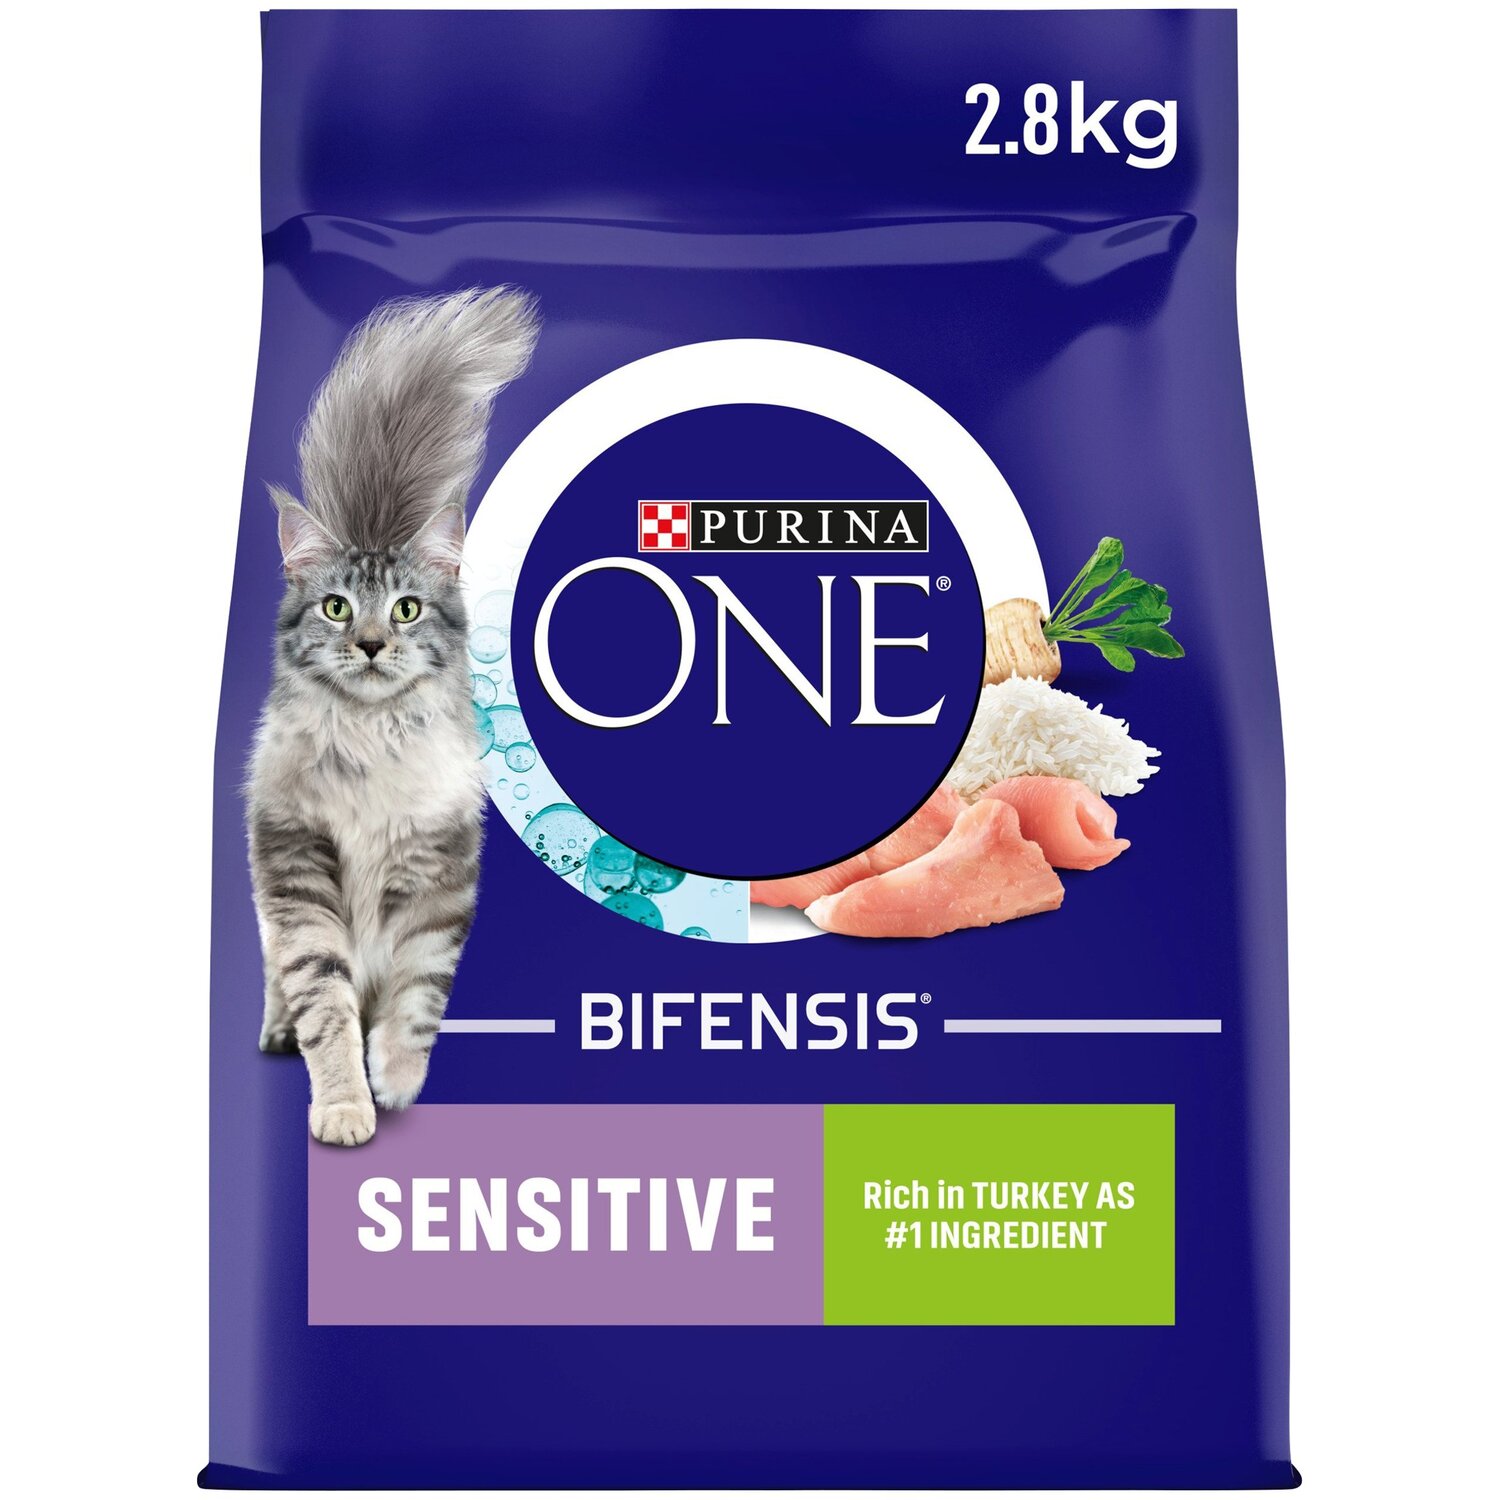 Purina One Sensitive Turkey and Rice Dry Cat Food 2.8kg Image 1